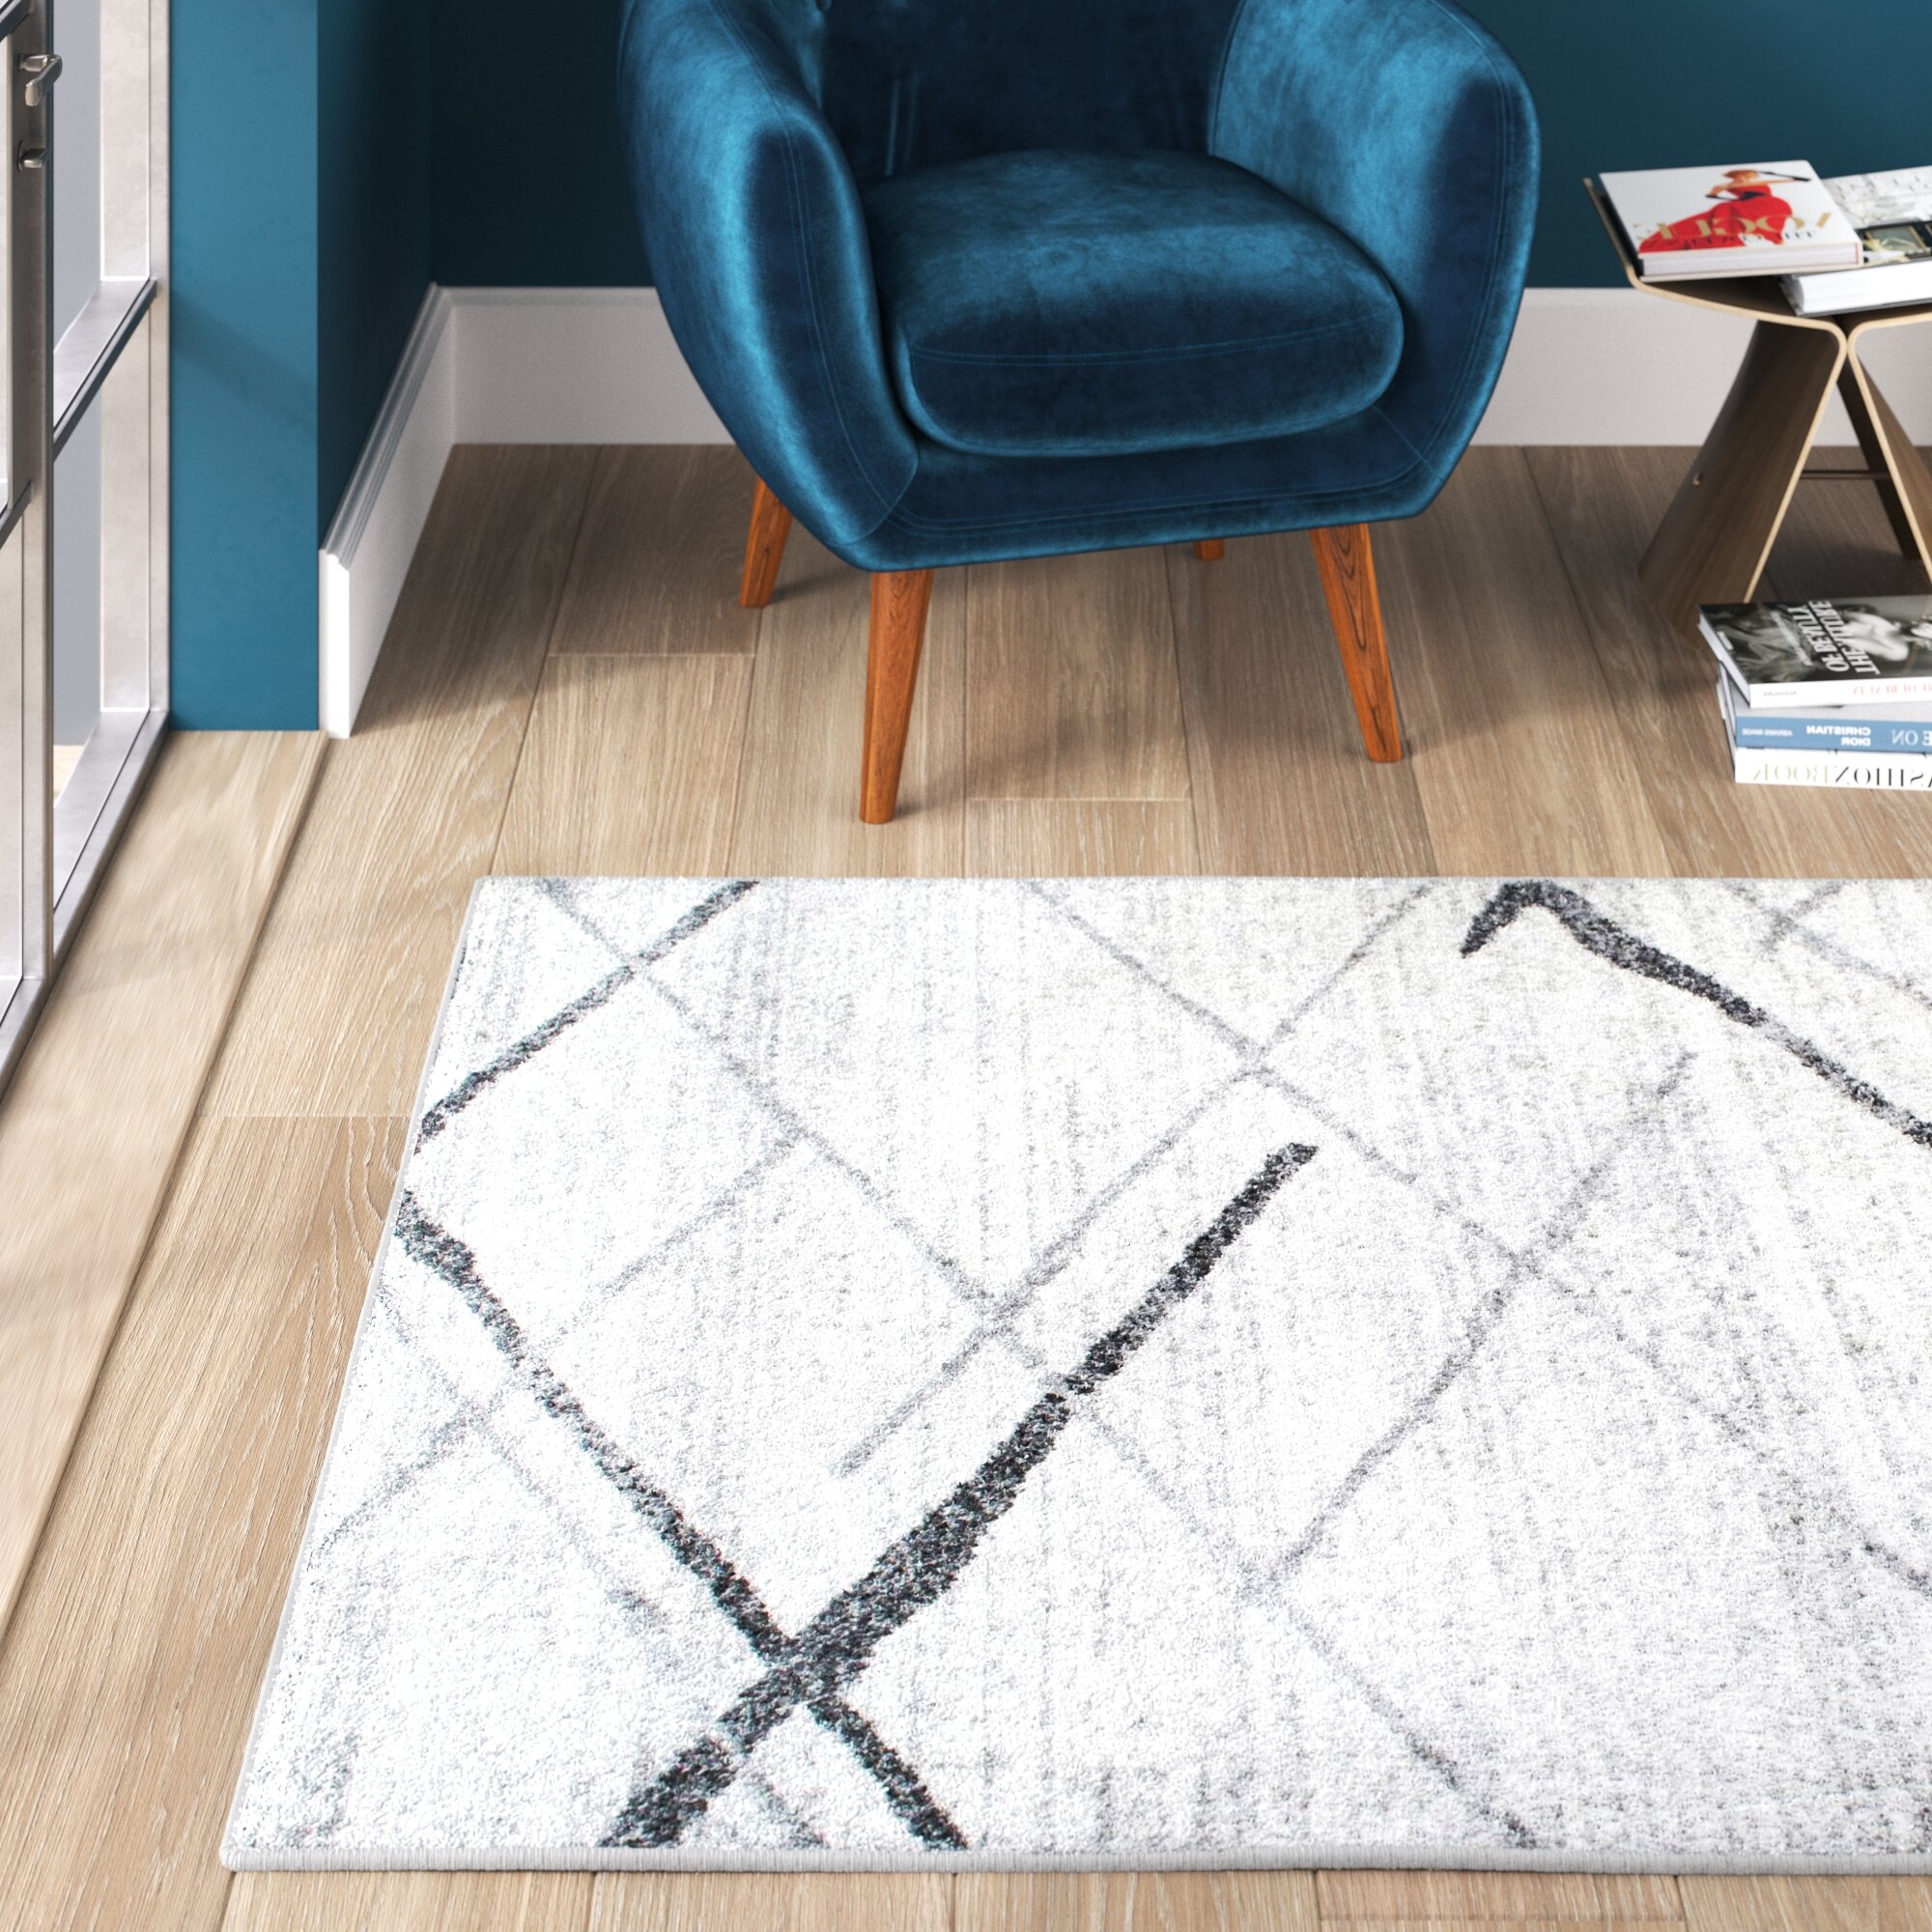 Large Cheap Living Room Rugs for Sale Modern Clearance Geometric Hallway Runner